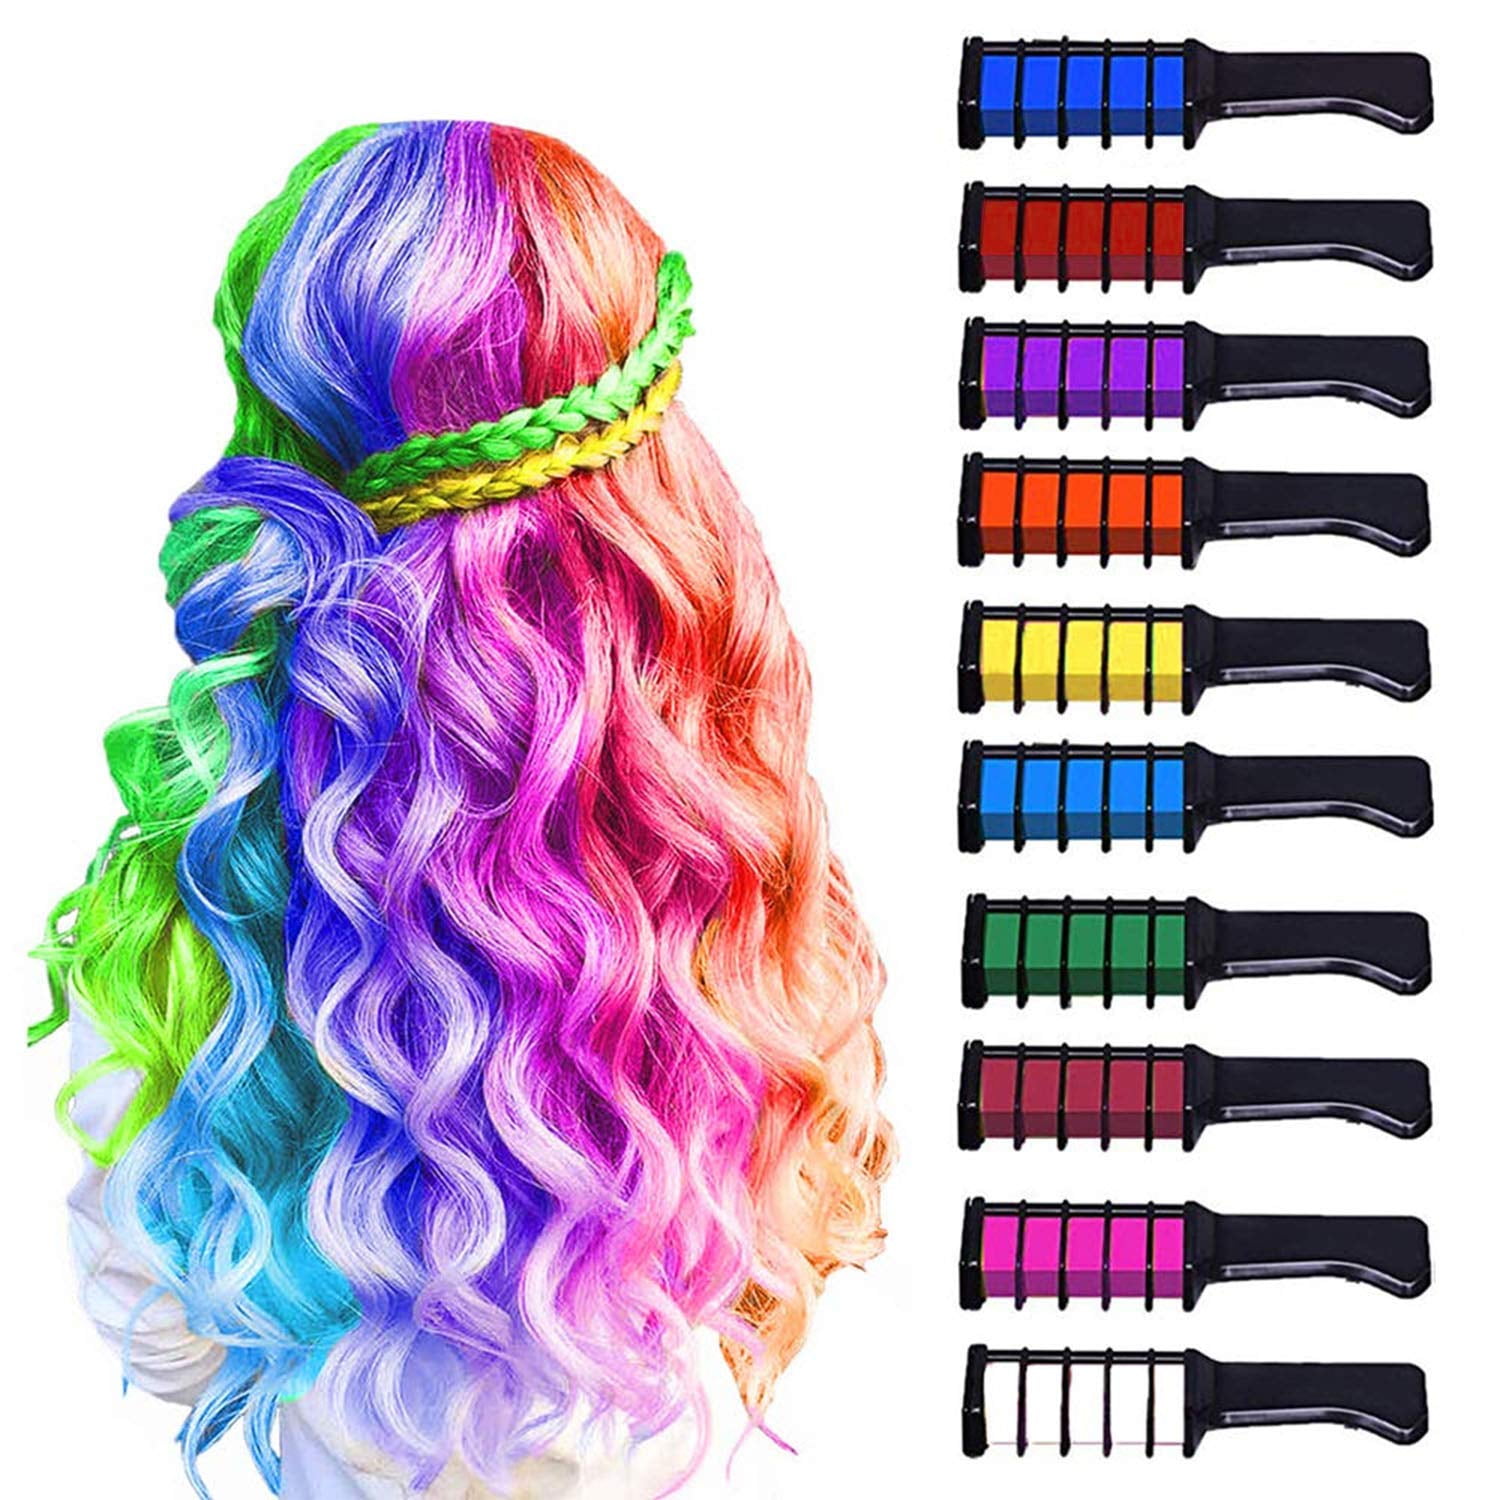 Disposable Hair Chalk Comb,professional Temporary Instant Hair Color  Highlights Streaks Hair Colorin | Disposable Hair Chalk Comb,professional  Temporary Instant Hair Color Highlights Streaks Hair Colorin 